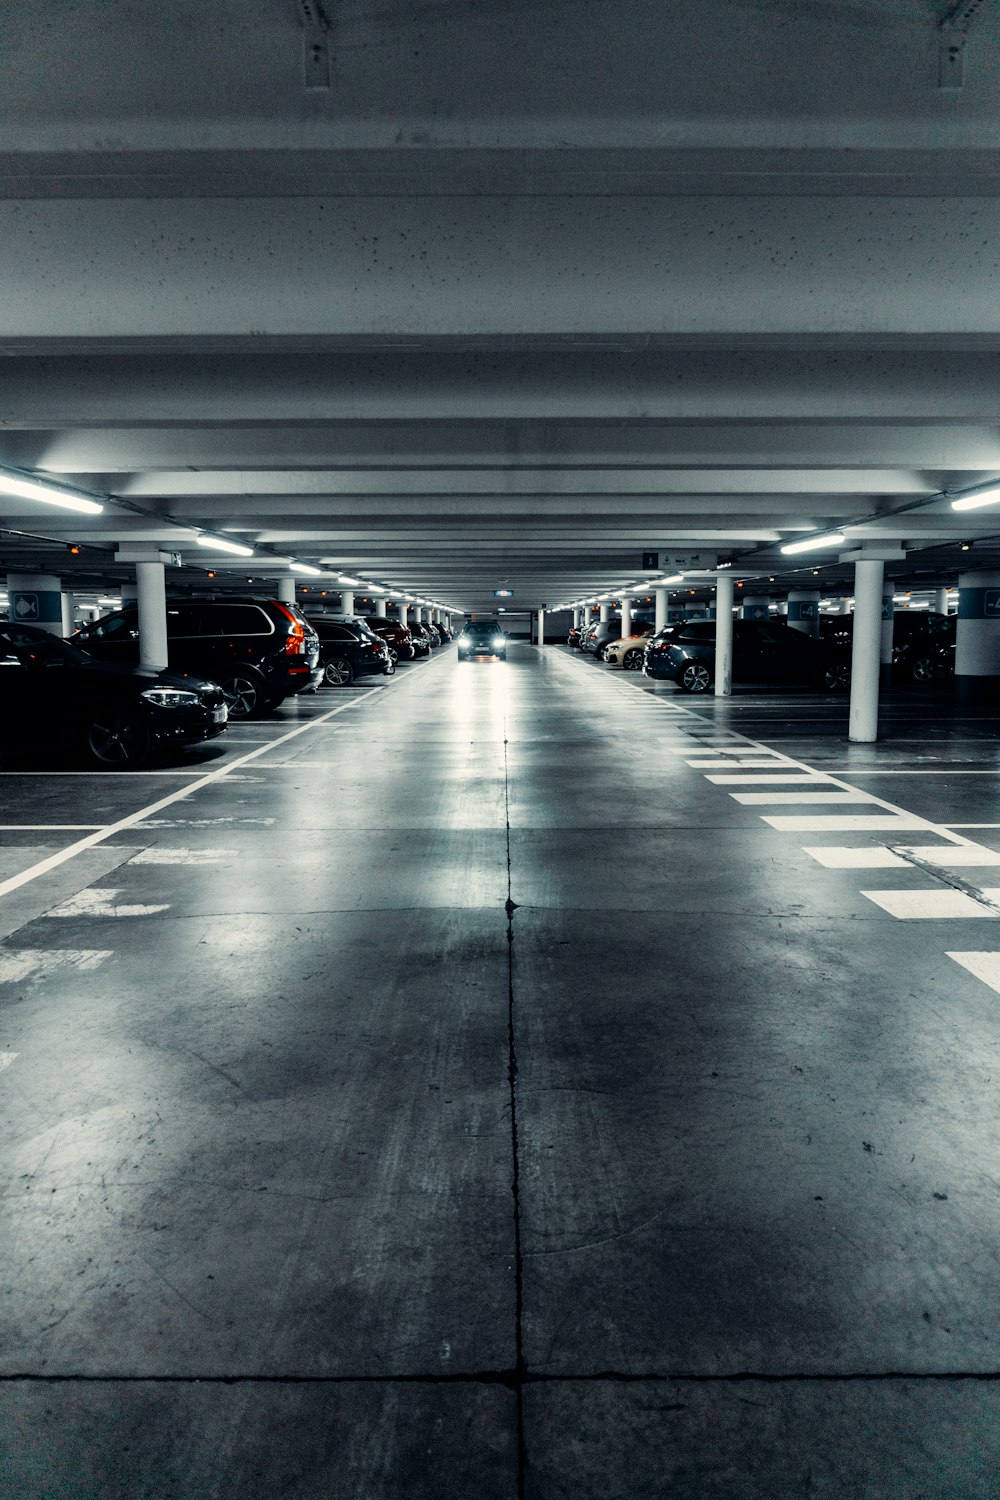 a parking garage filled with lots of parked cars